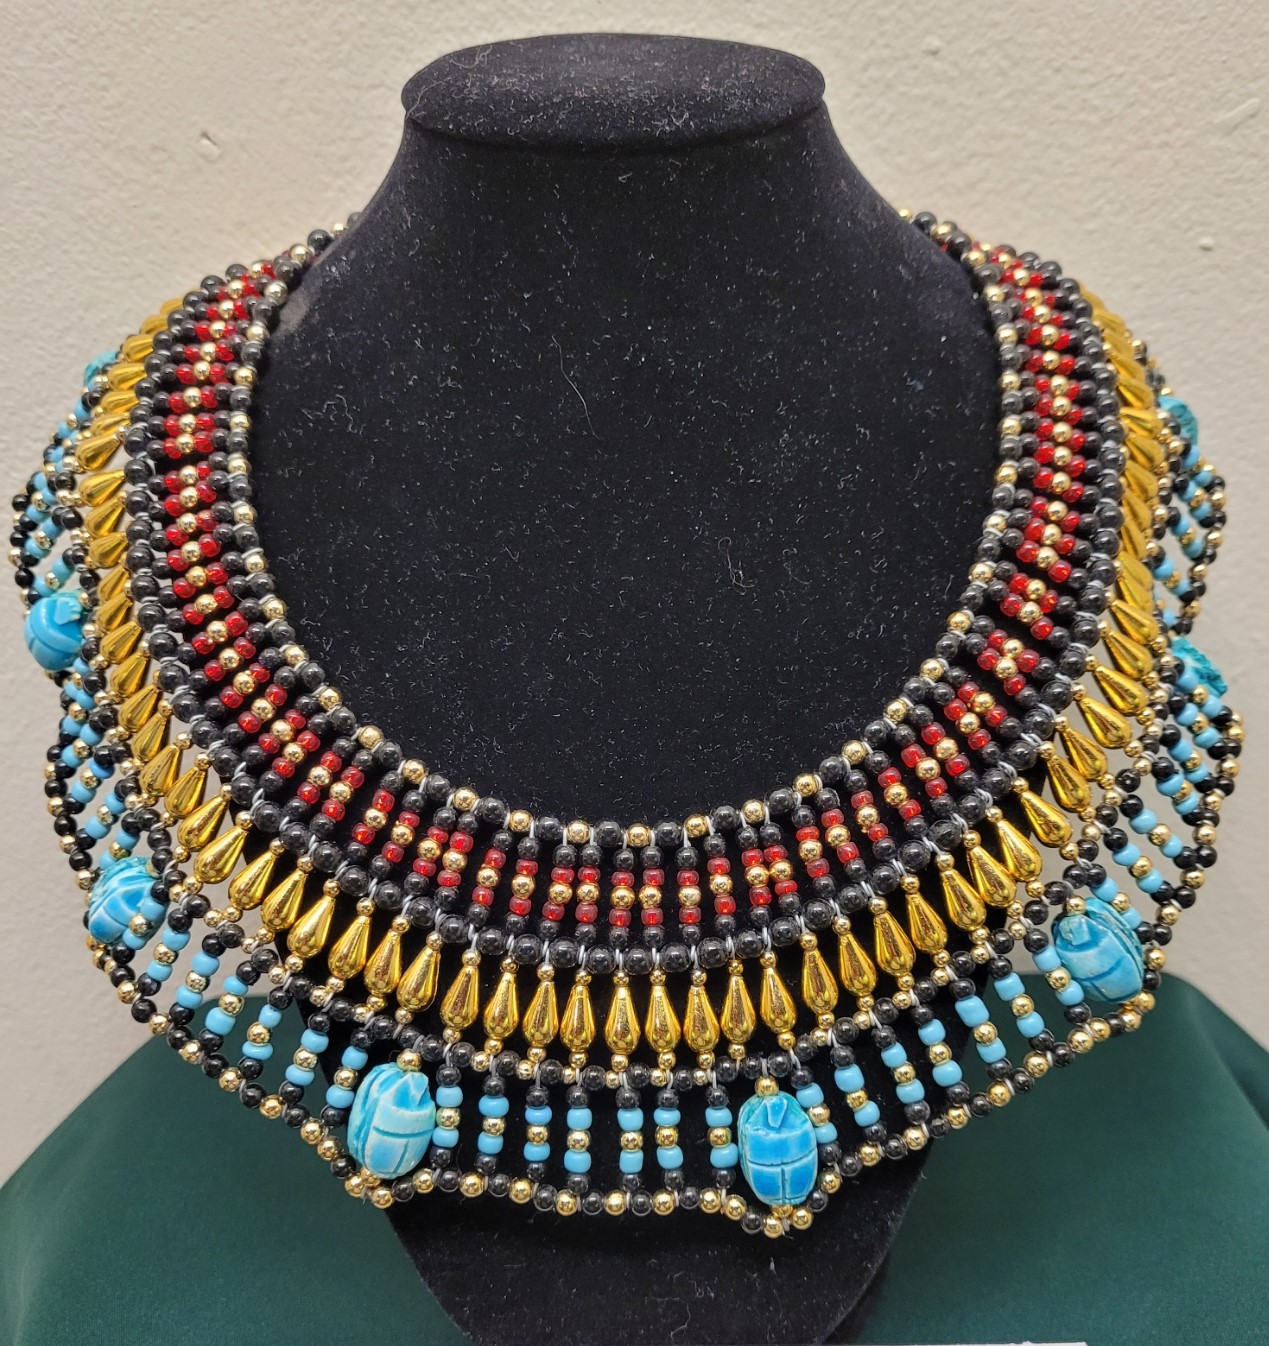 Egyptian Necklace in our Art From Around the World Exhibit